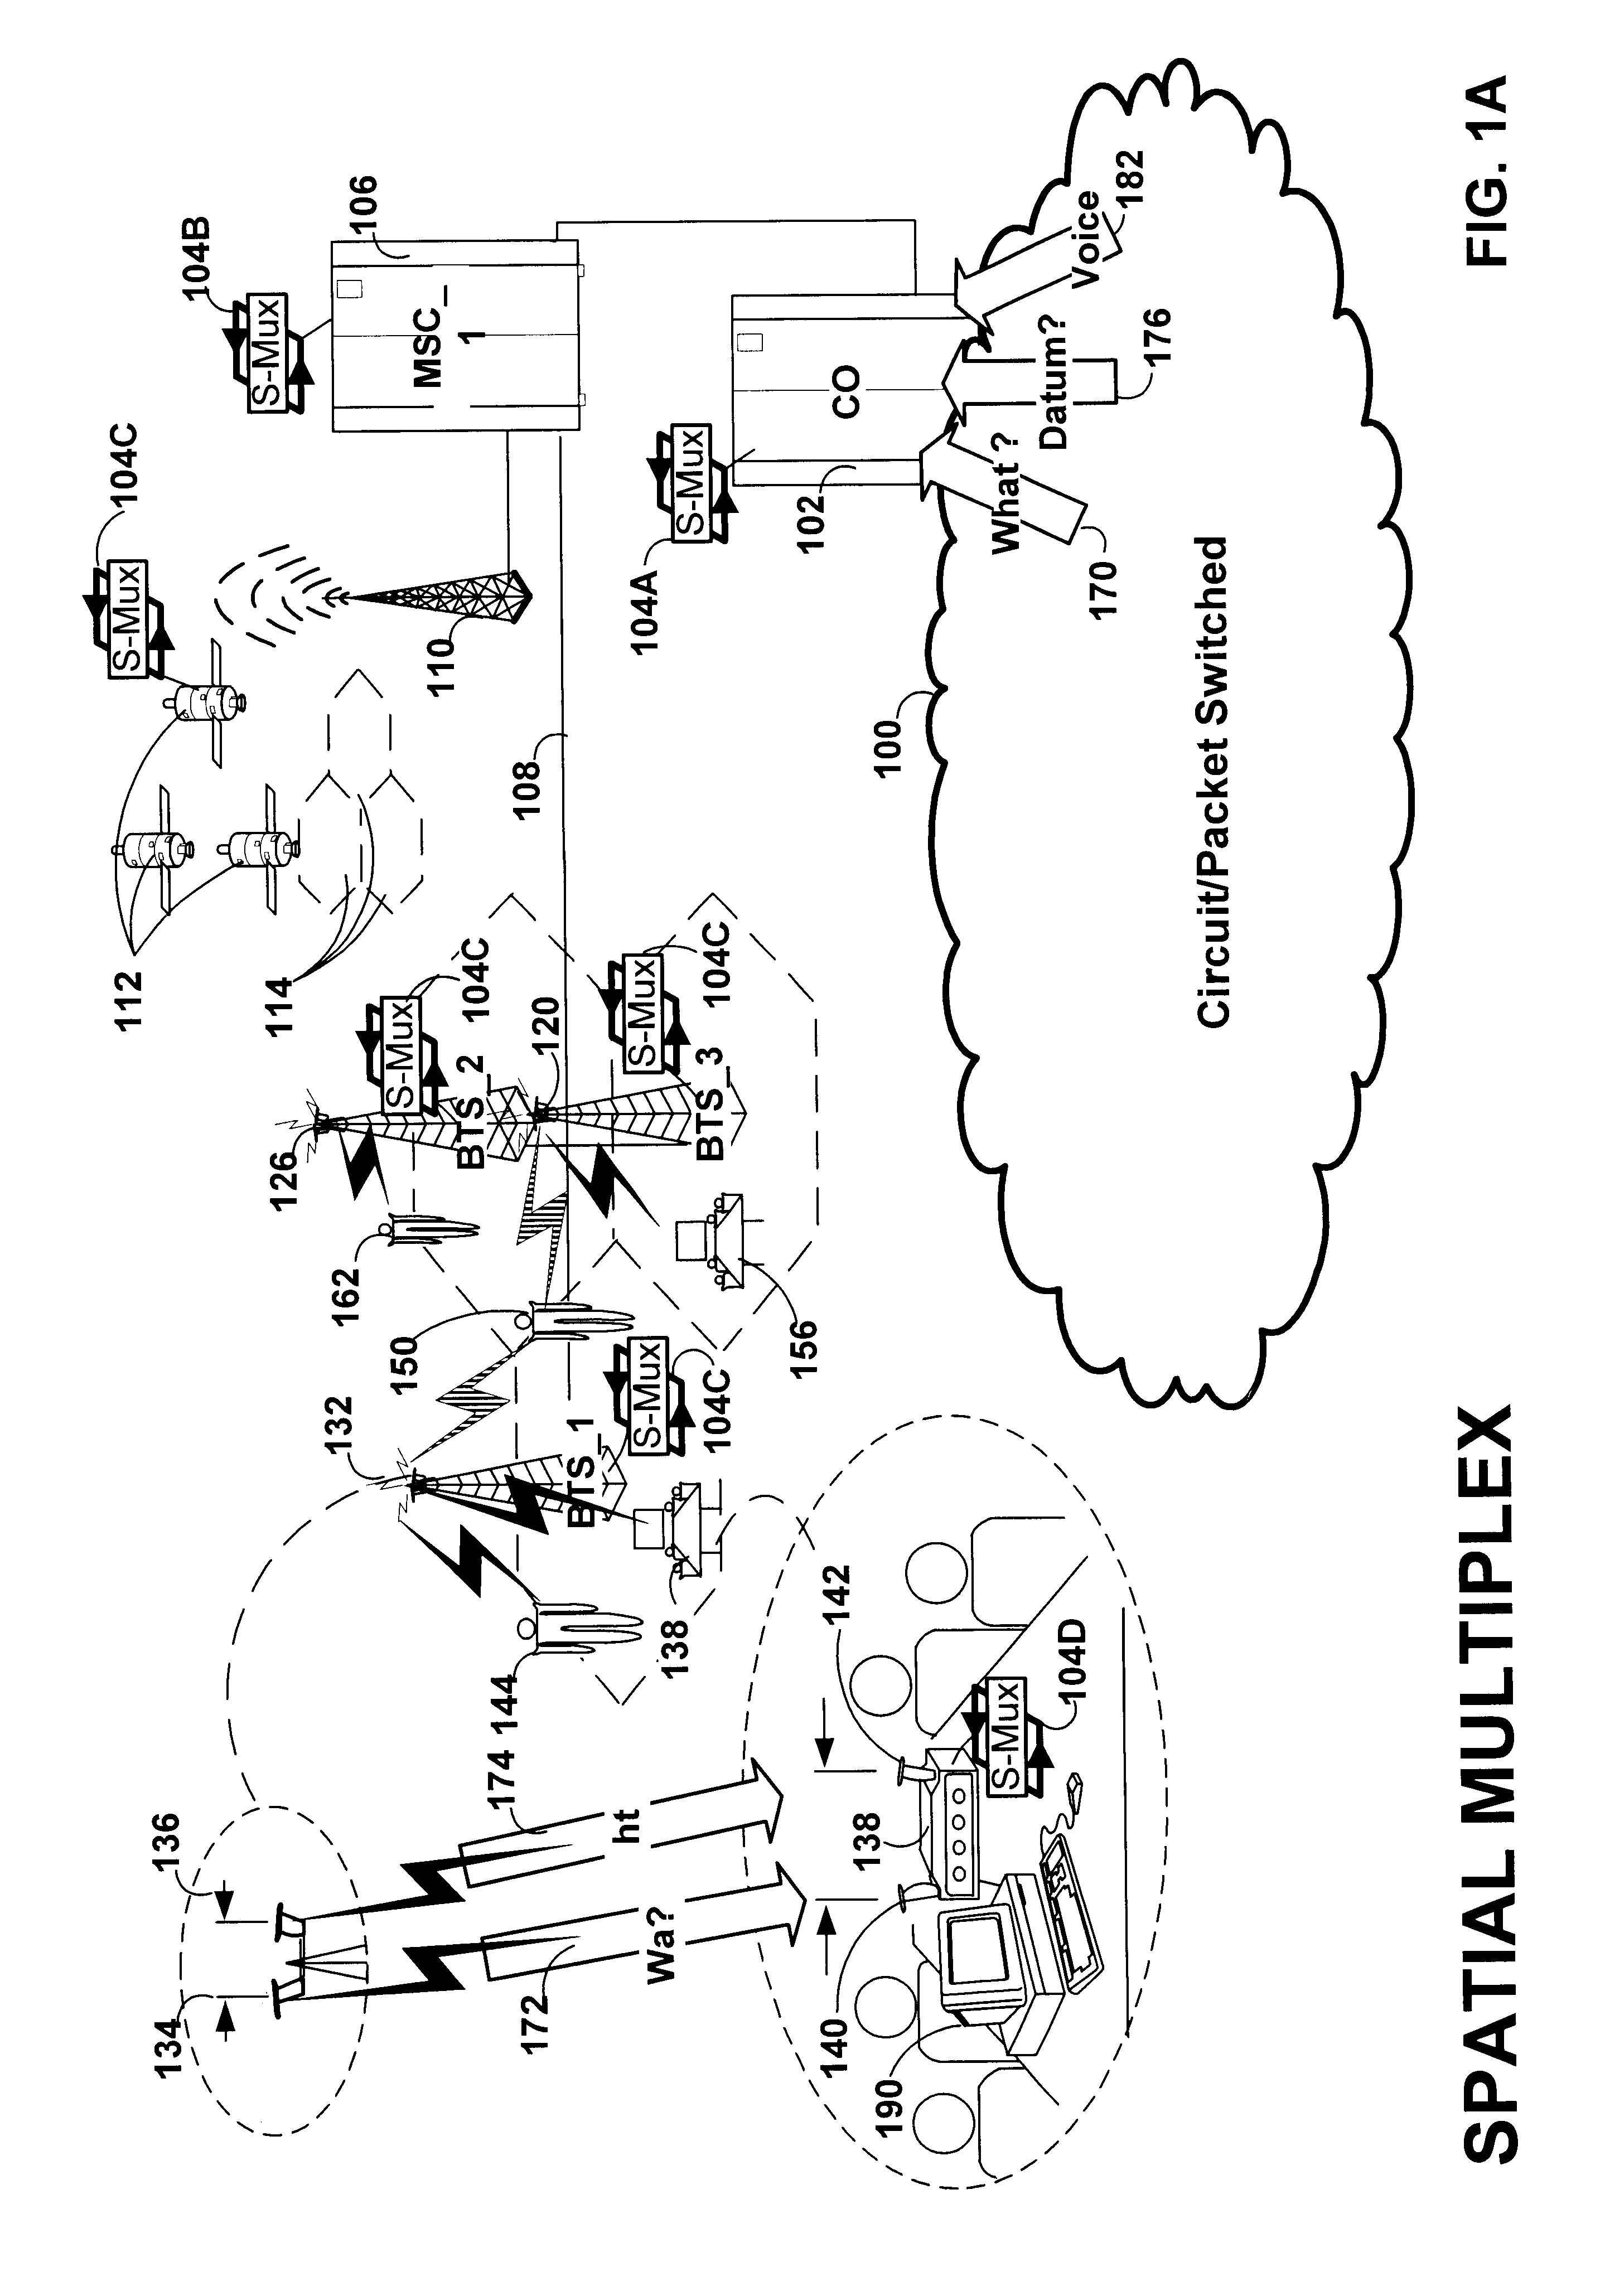 Subscriber unit in a hybrid link incorporating spatial multiplexing